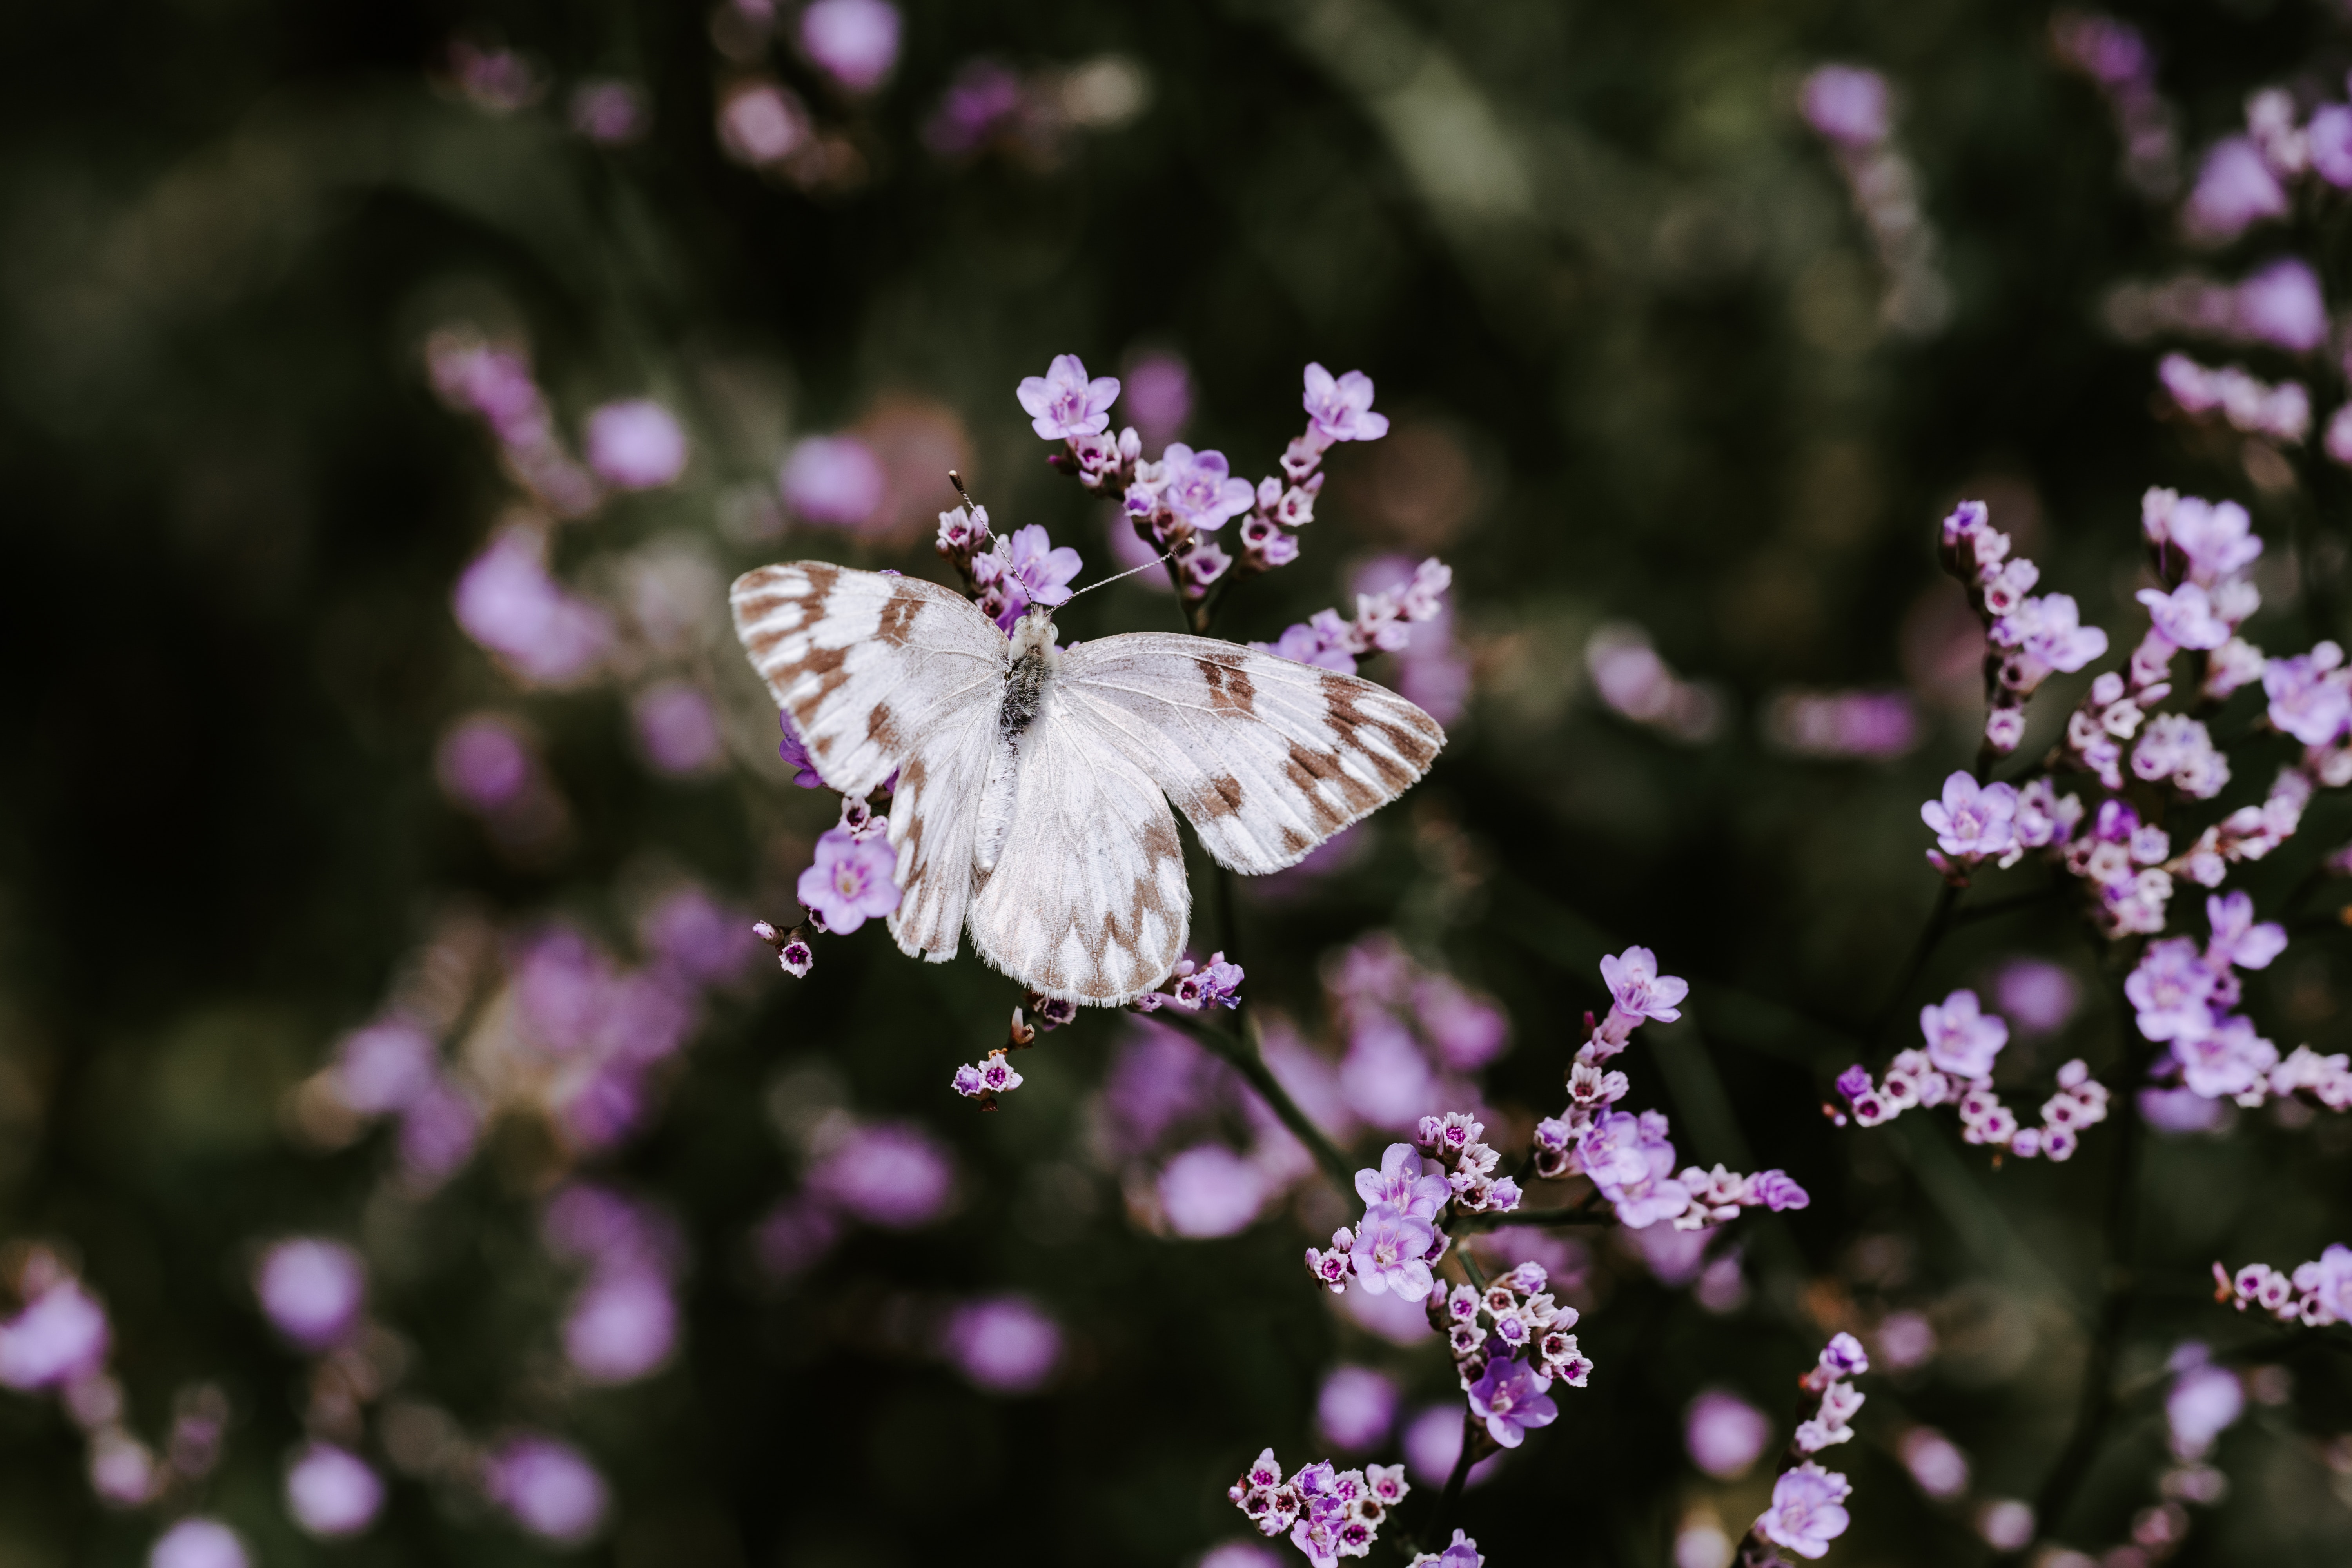 114762 download wallpaper bloom, flowers, macro, flowering, insect, butterfly screensavers and pictures for free